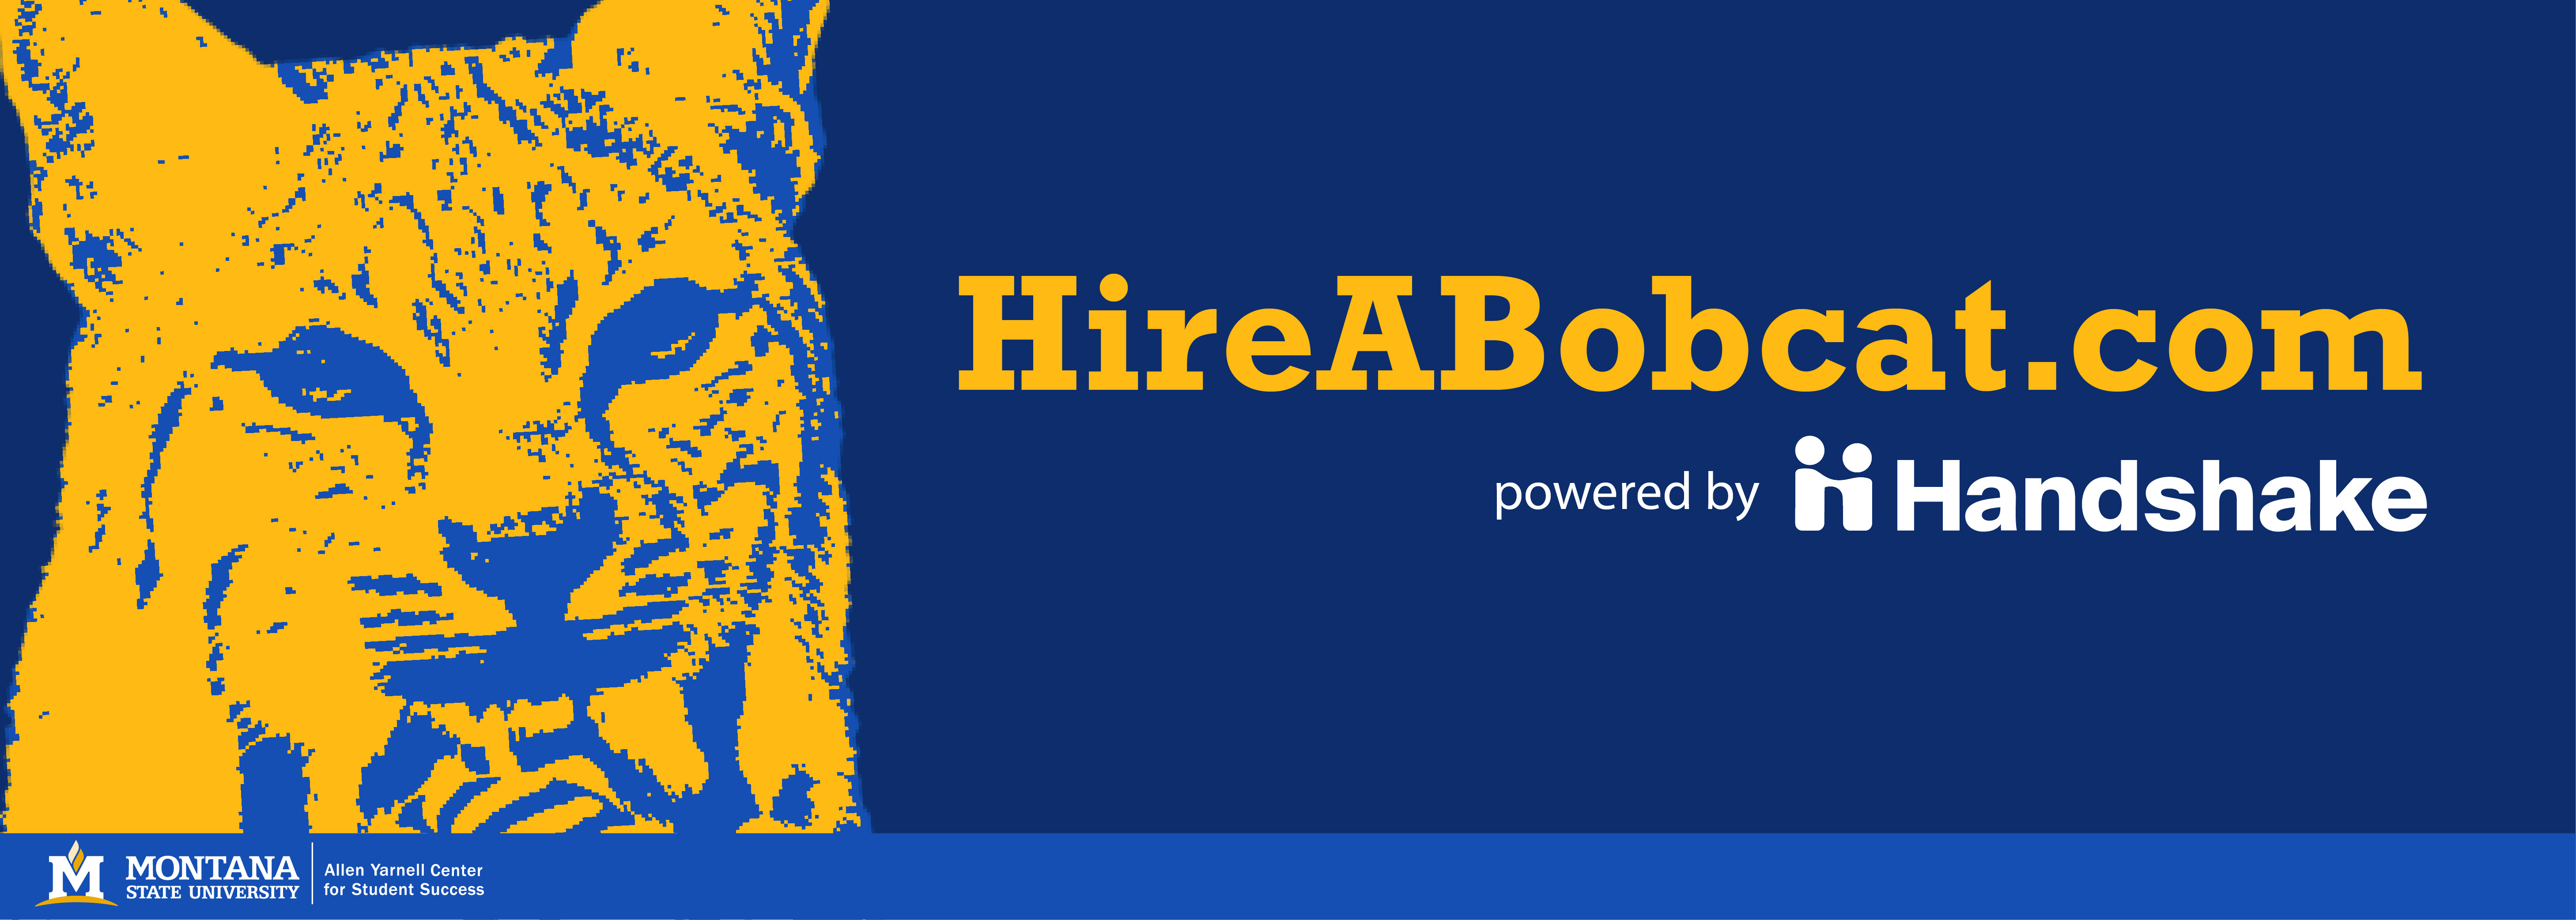 hireabobcat.com is now powered by handshake